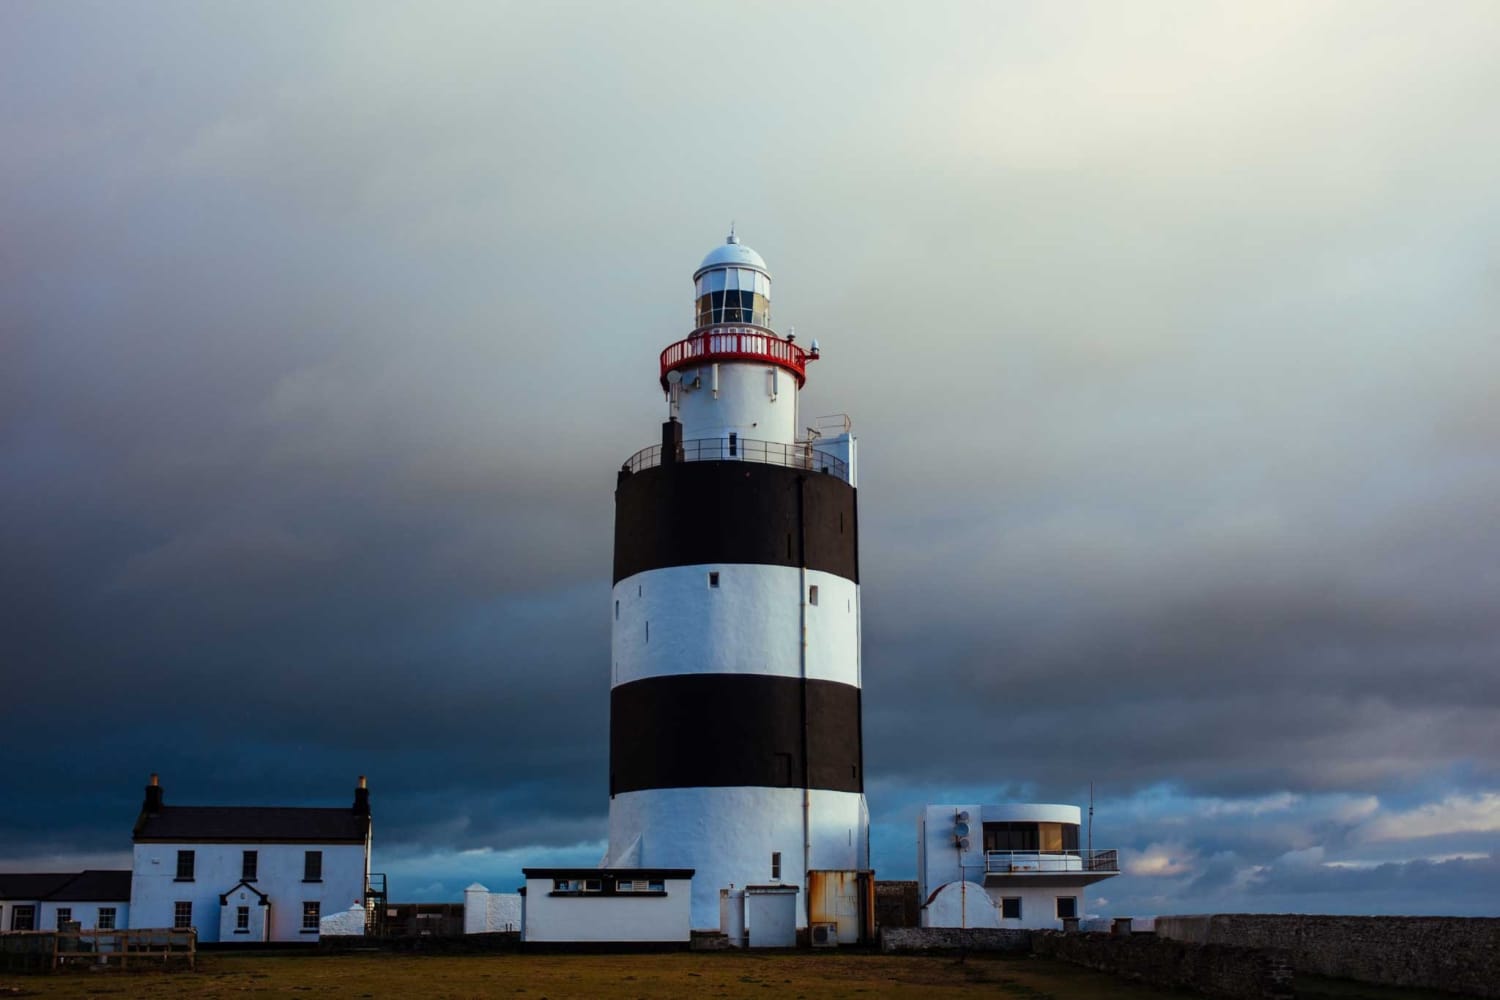 Nine of the Most Iconic Lighthouses in the World (pt 2)